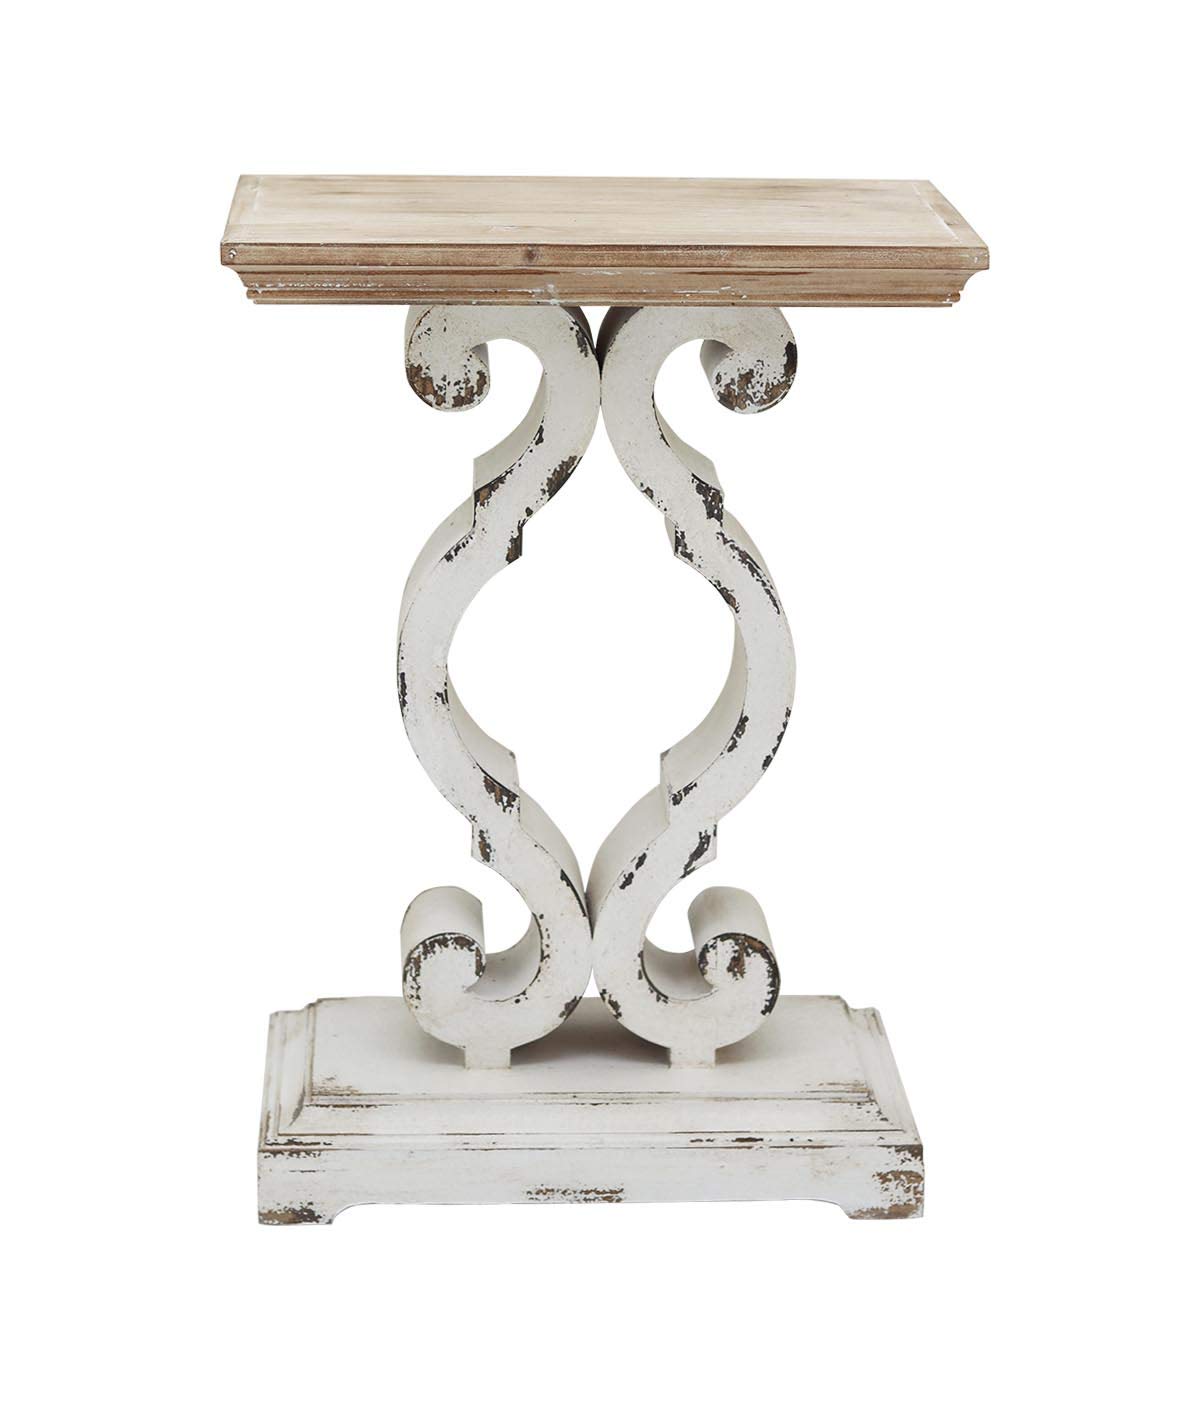 CreativeWise French Country Accent Rectangle Wood End Table, Farmhouse End Table Side Table Sofa Table Nightstand with Natural Wood Top and Distressed White Carved Base, 19.75 x 11.75 x 27.5 Inches